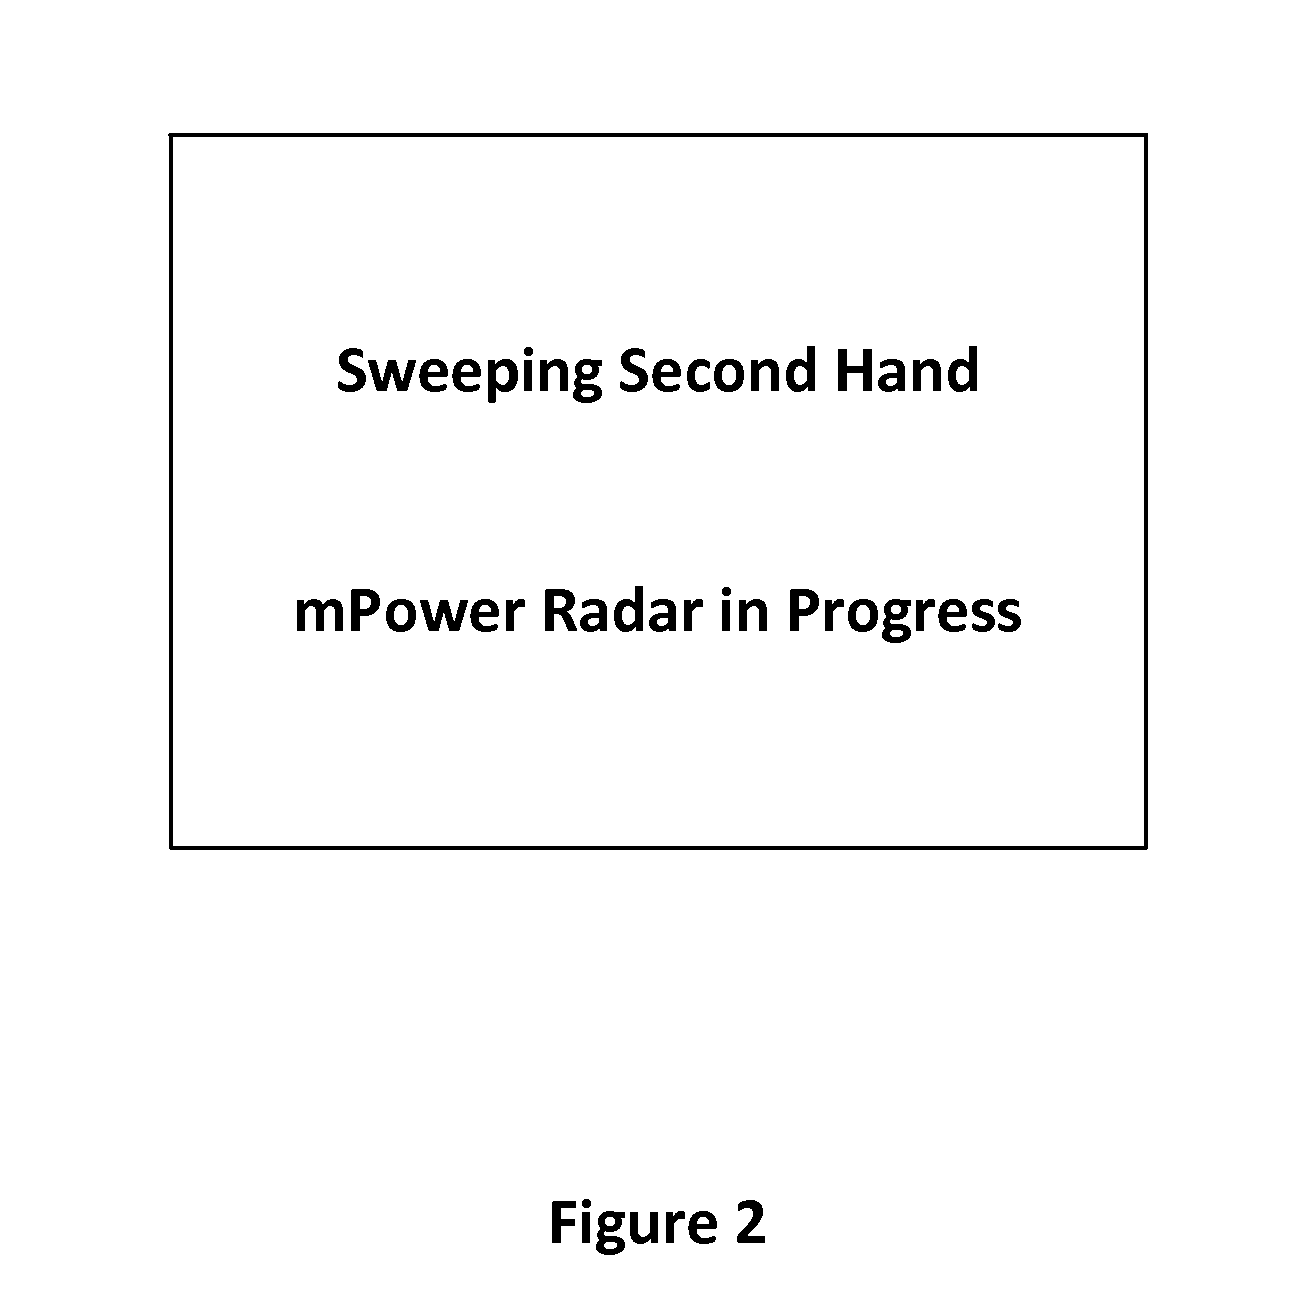 System and Method for Providing Competitive Pricing for Automobiles